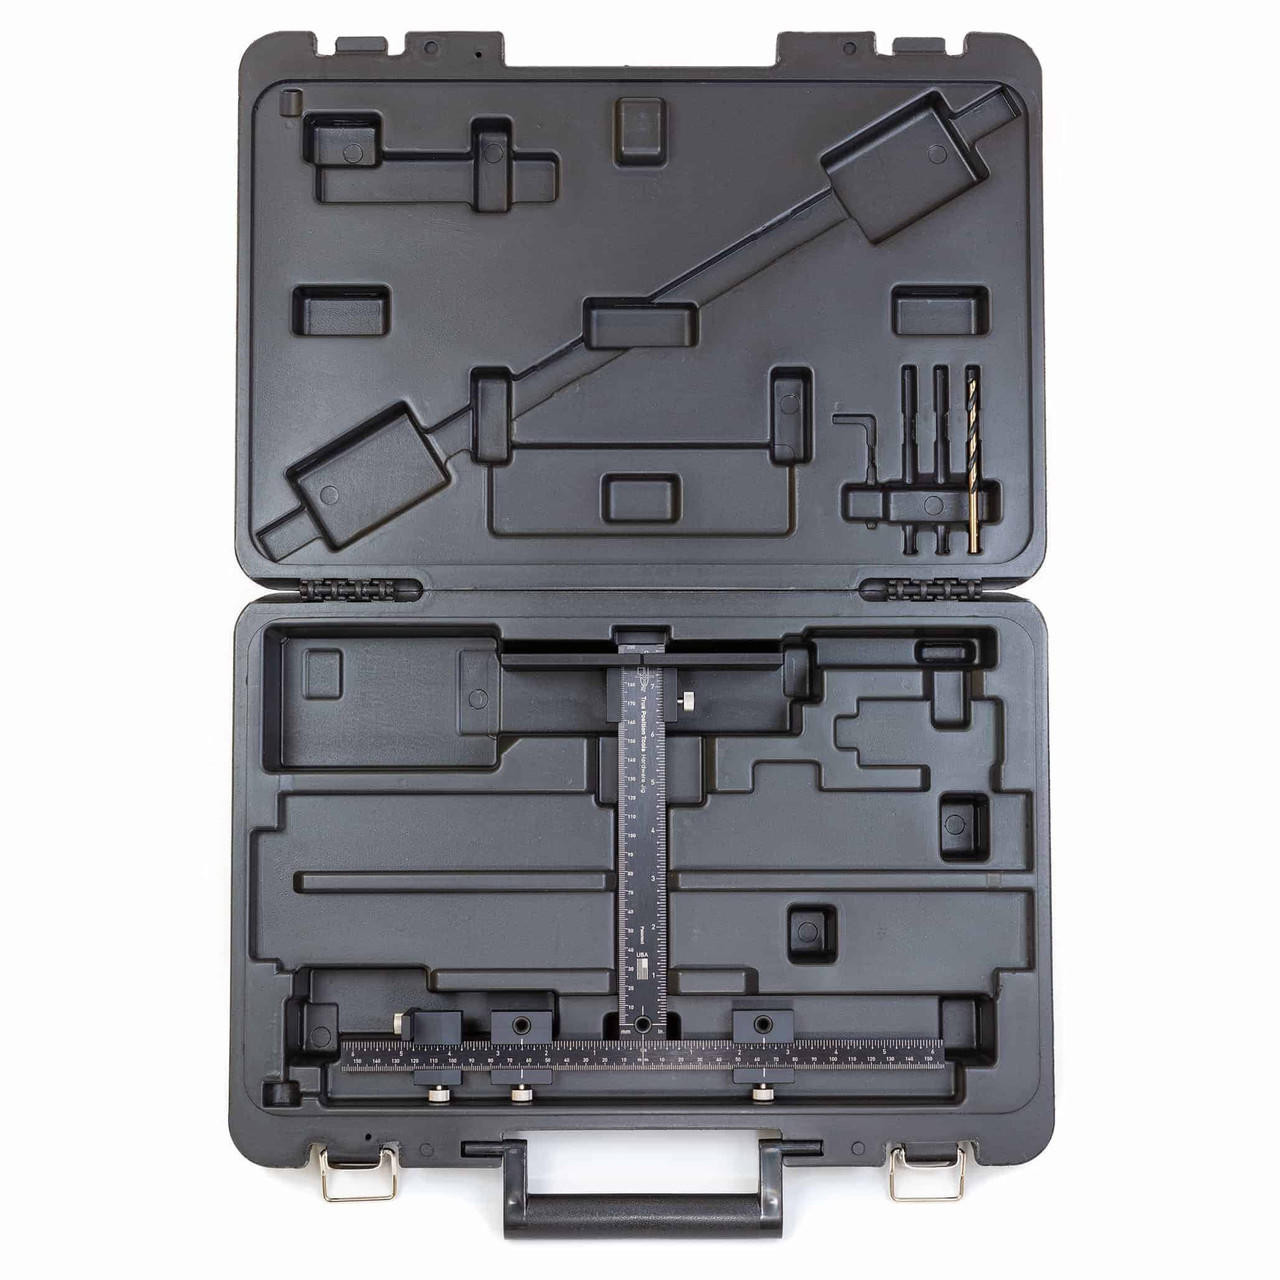 TRUE POSITION TOOLS TRUE POSITION Cabinet Hardware Jig PRO + Case TP-CHJ-PRO (Formerly TP-1934E) 